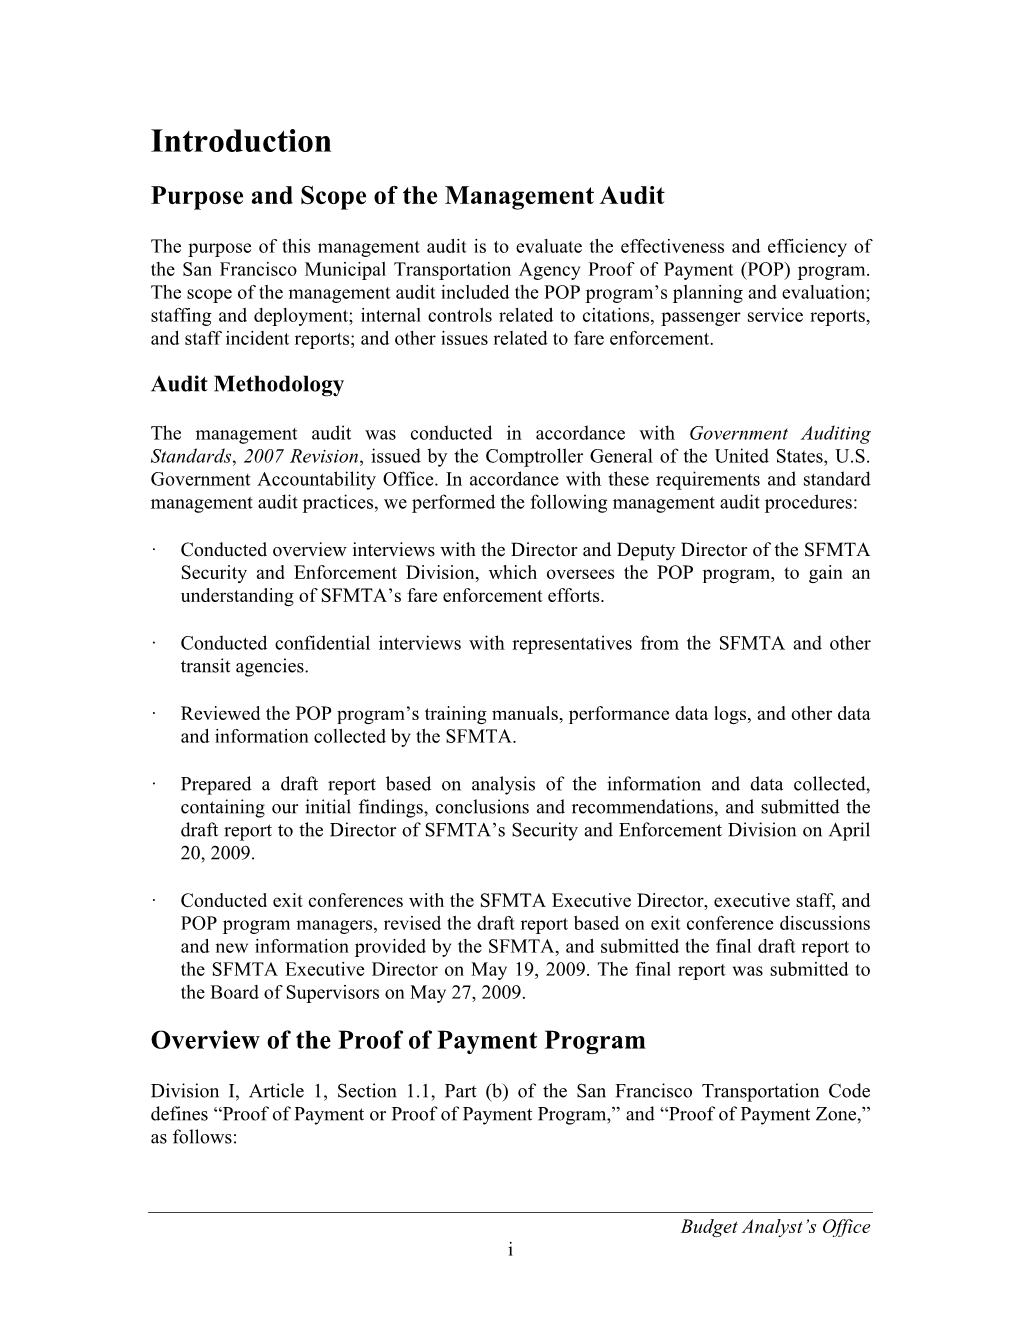 Introduction Purpose and Scope of the Management Audit